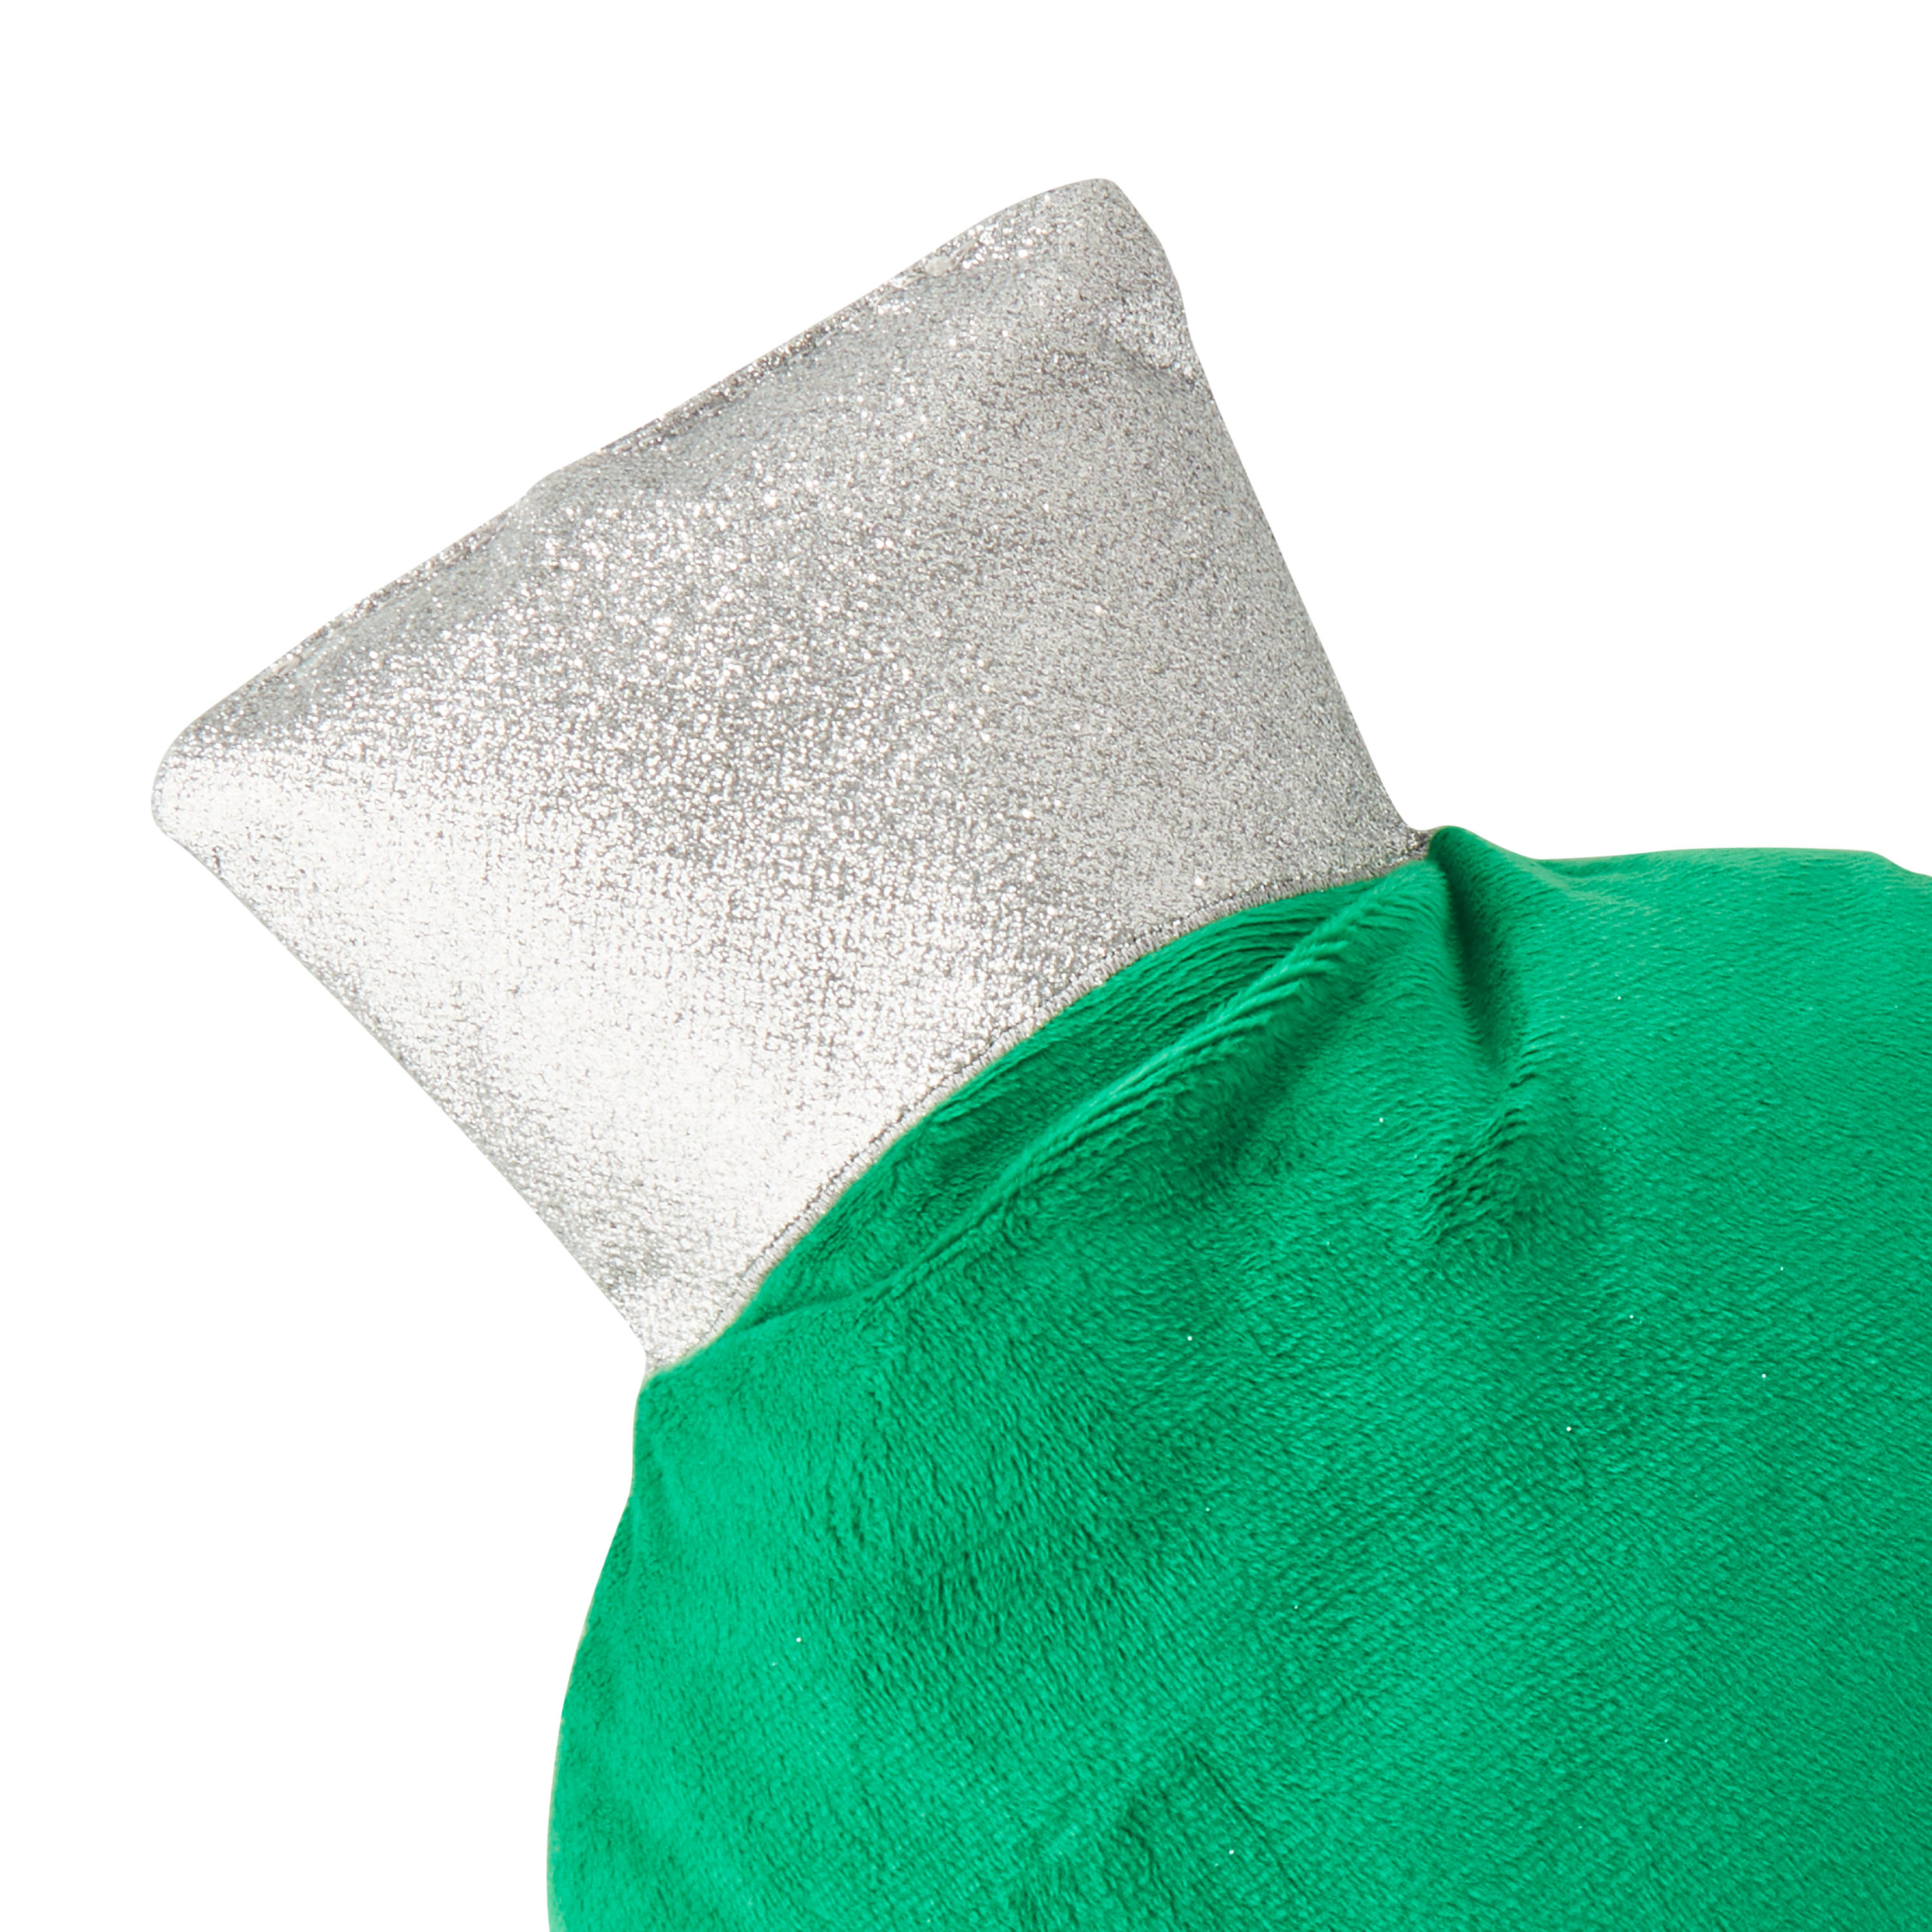 Holiday Time Christmas 15 inch Green C9 Bulb Decorative Pillows Plush, 2-pack - image 2 of 6